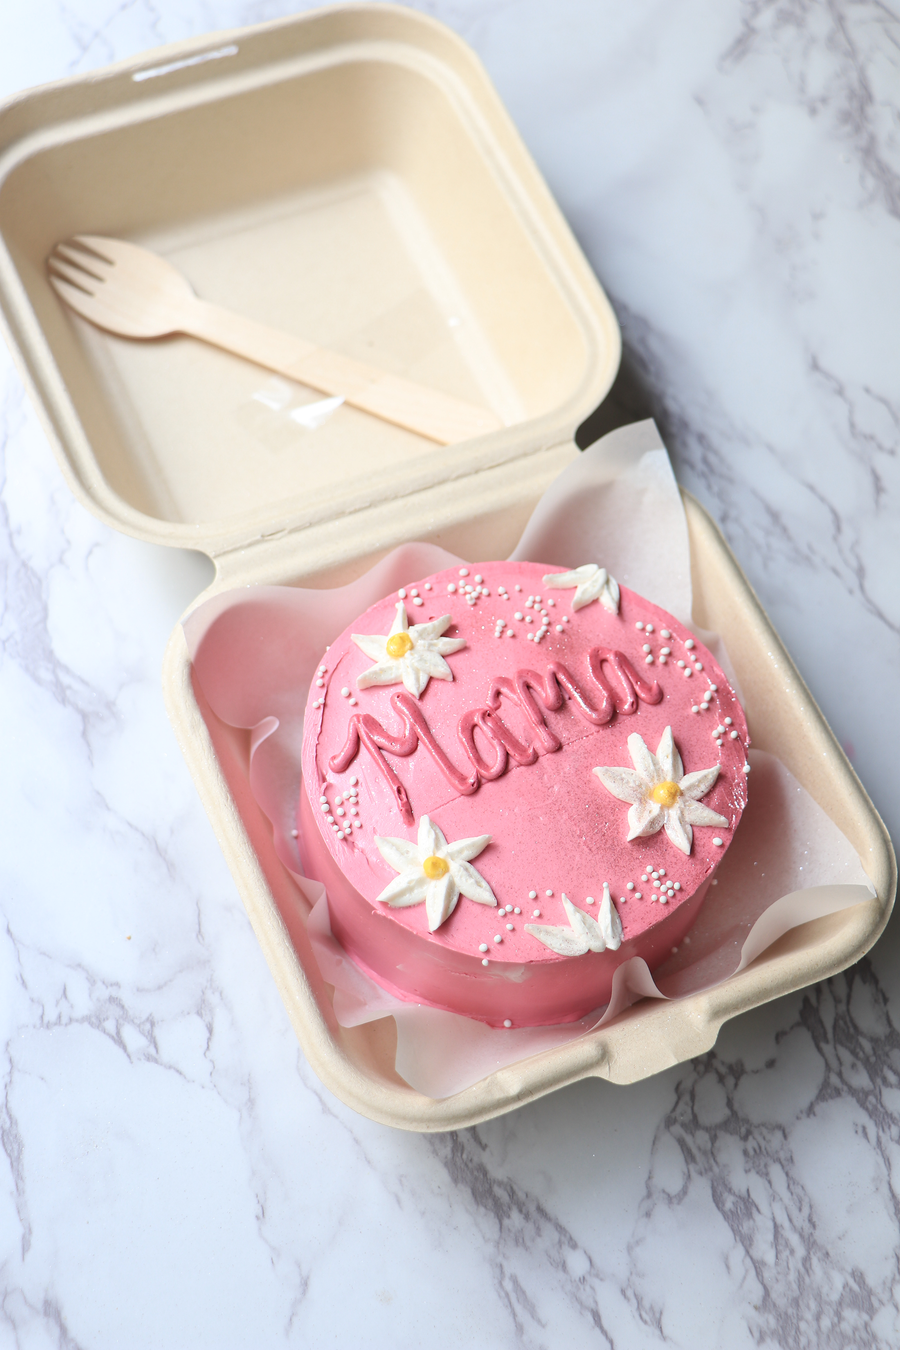 Baking and cake decorating ideas to bake Mother's Day sweeter